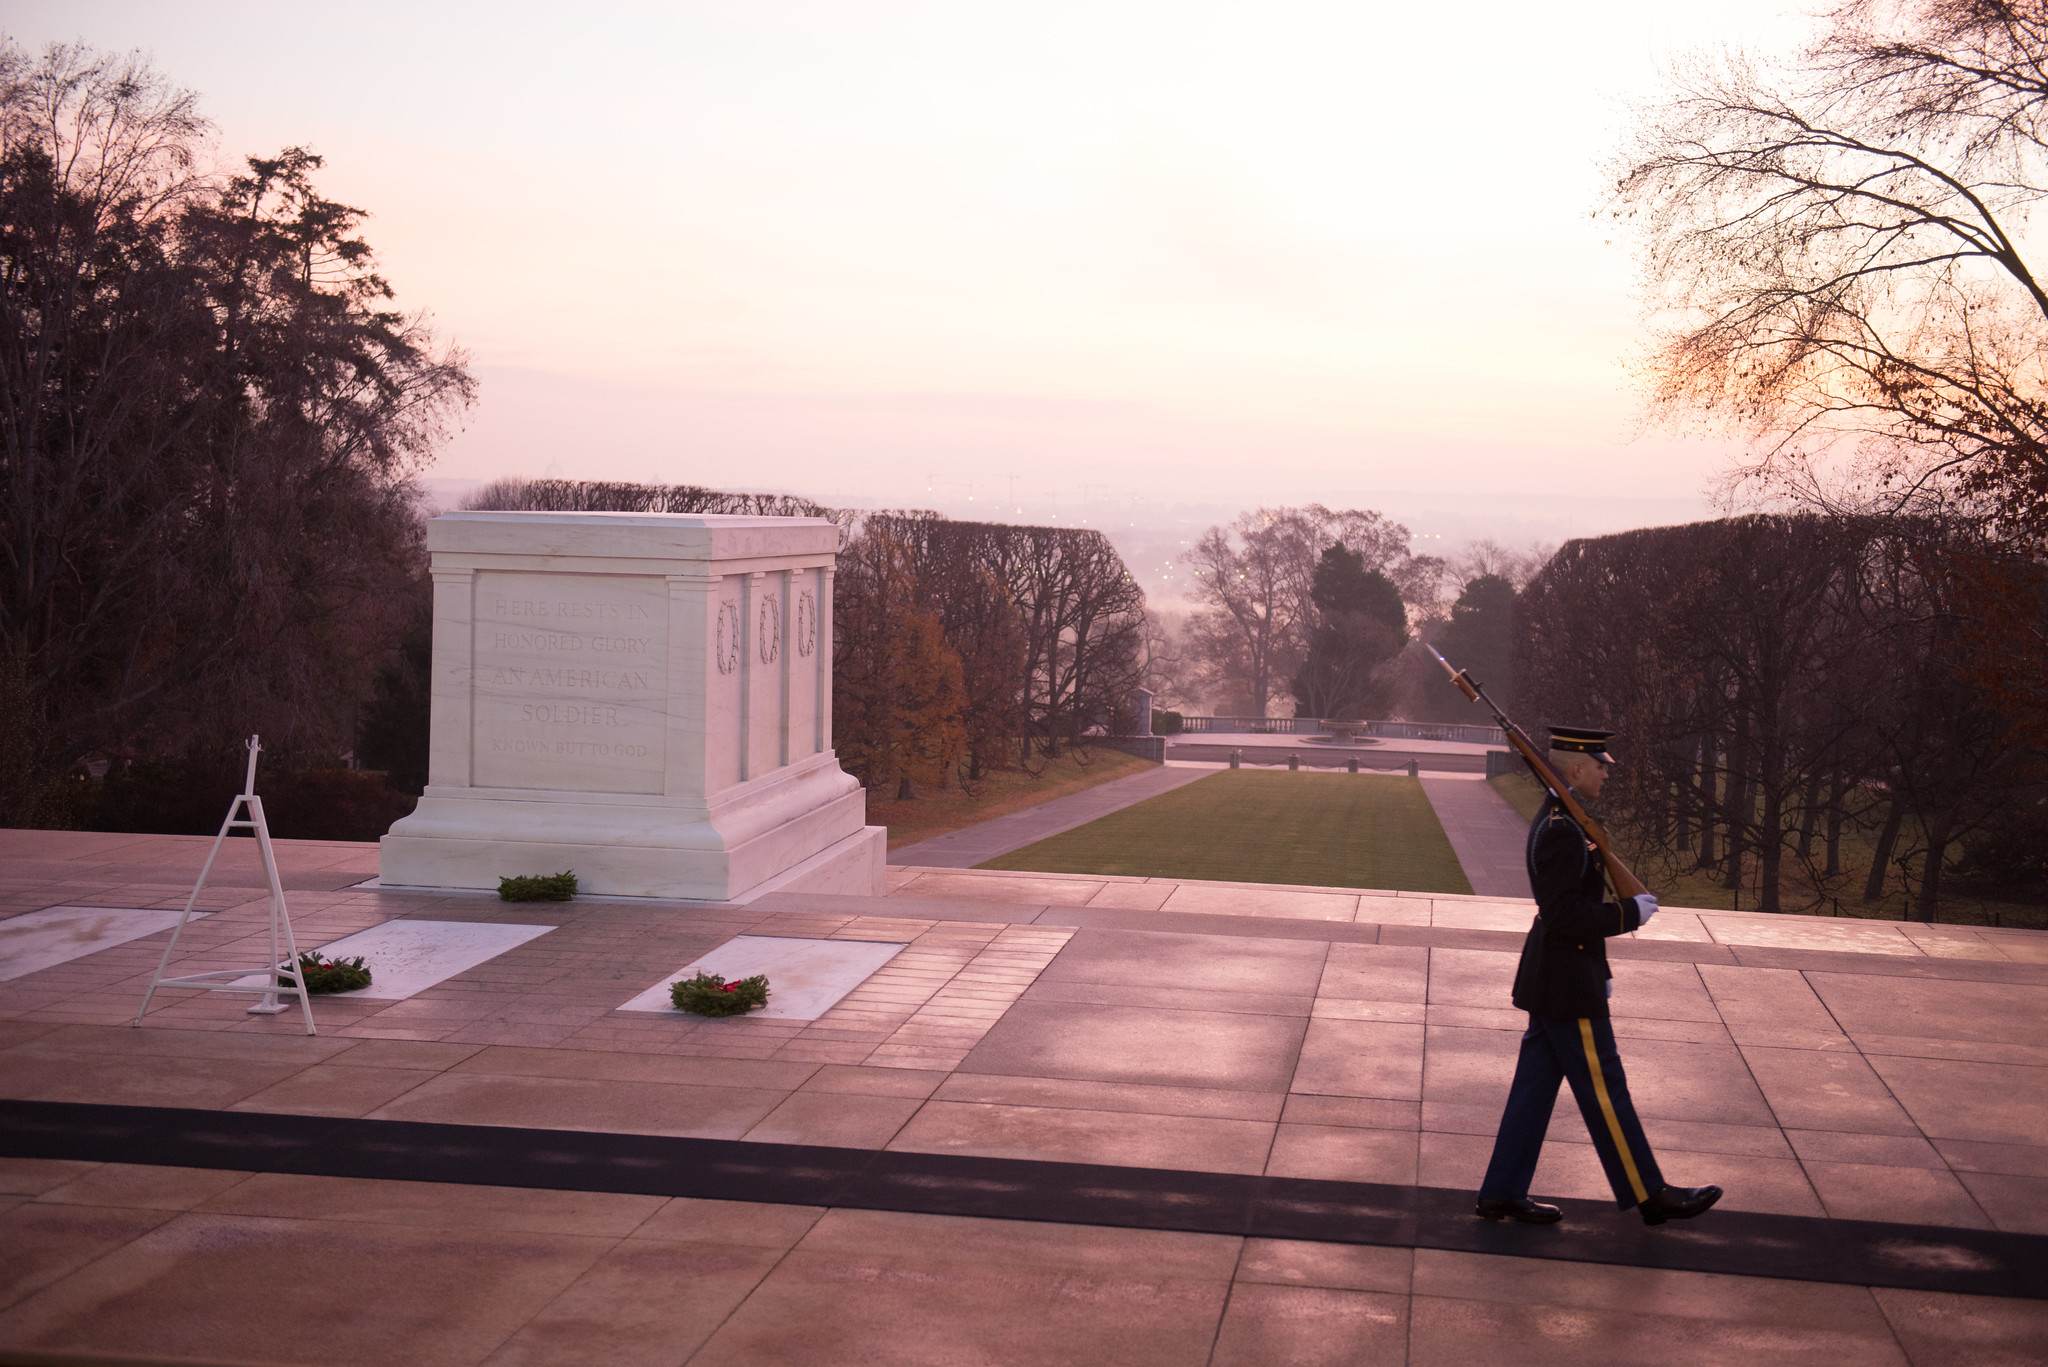 A sentinel of the U.S. Army Old Guard patrols the Tomb of the Unknown Soldier at dawn